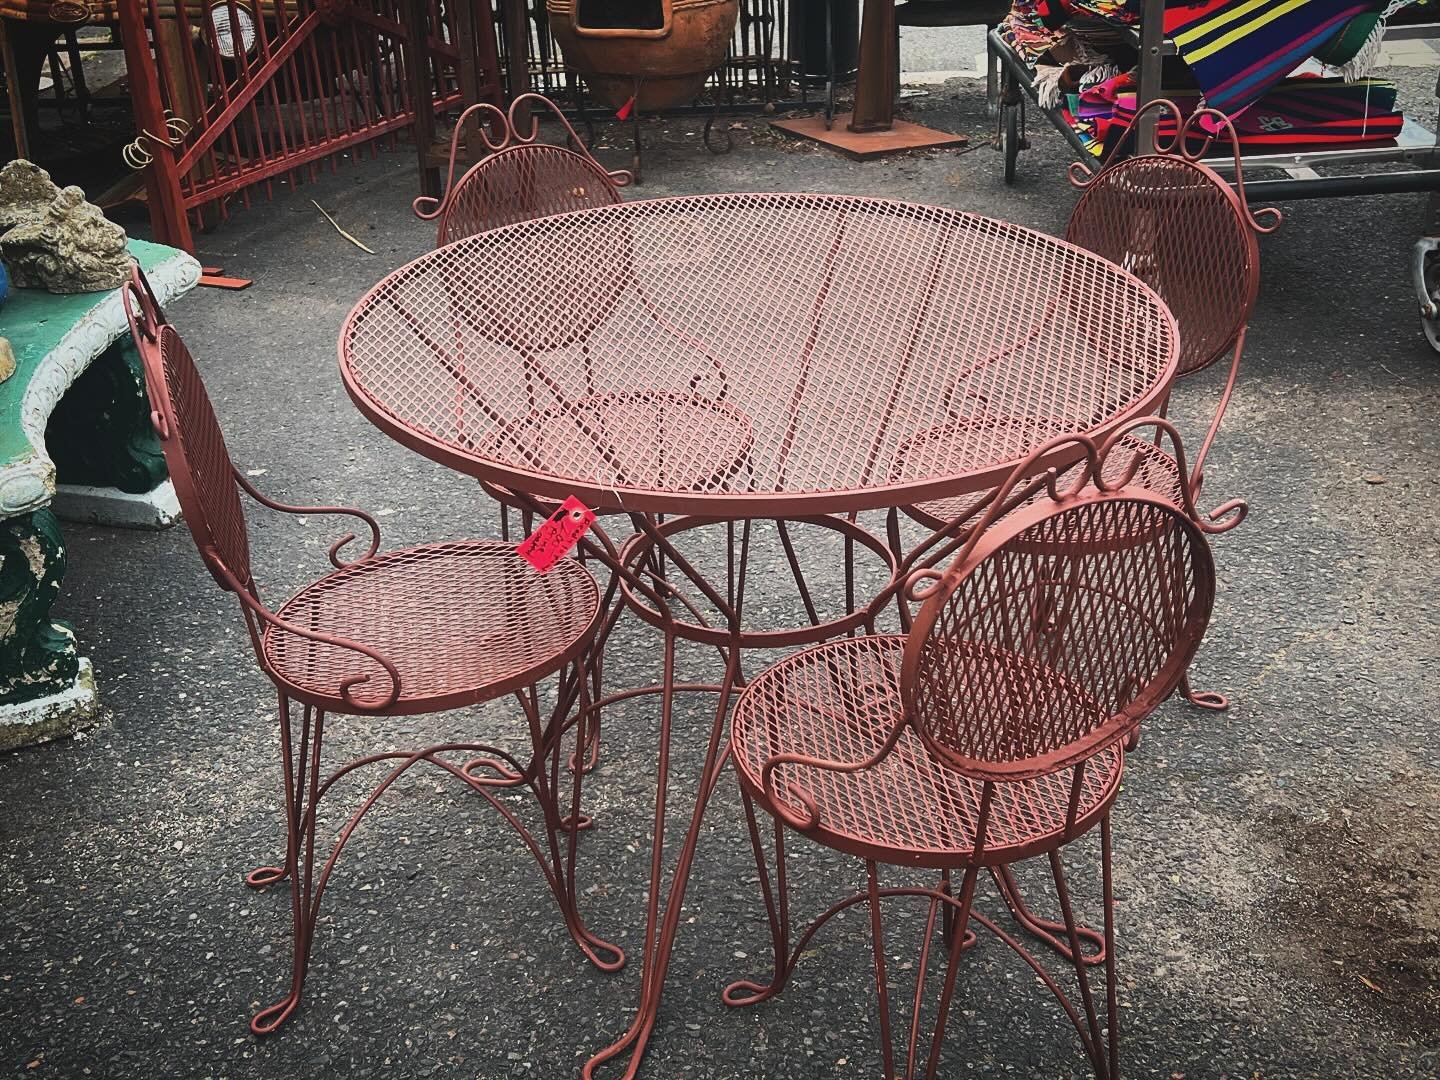 Cute outdoor wrought iron set for smaller patio or porch .. primed and ready to paint any color you like &hellip; $200 for table and 4 chairs 
35&rdquo; table 

#patiofurniture #tableandchairs #letseat #diningset #outdoorfurniture #wroughtiron #merge